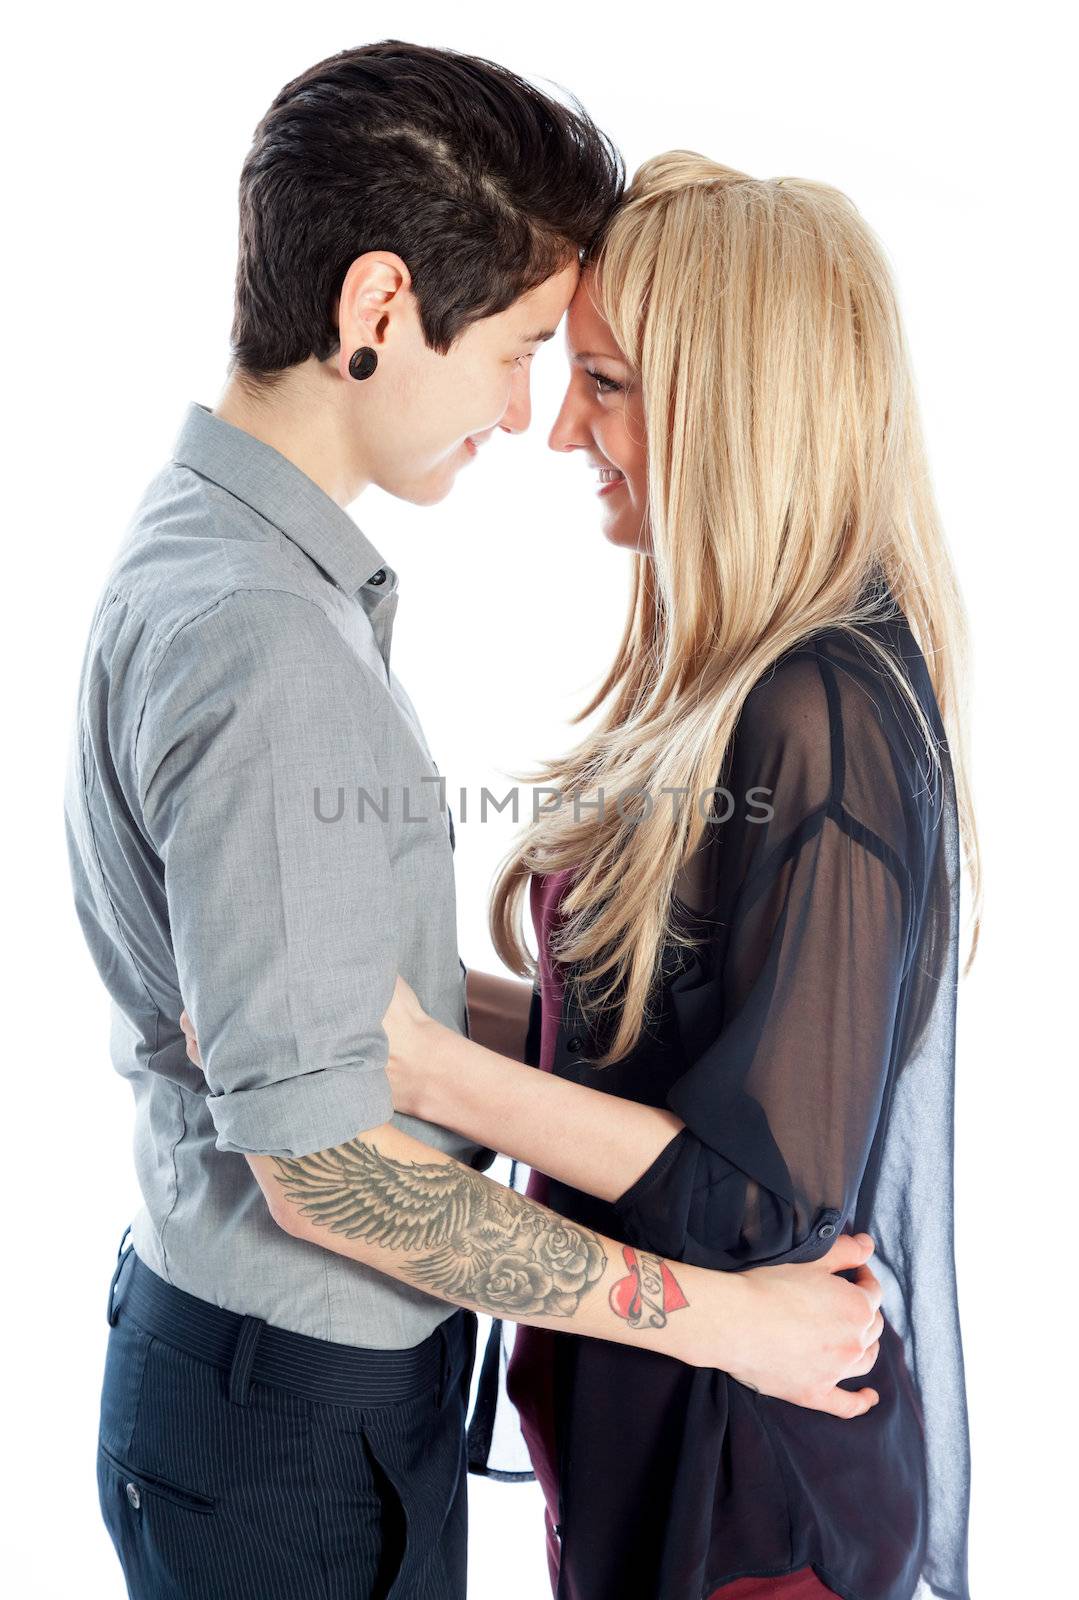 Cute Lesbian couple 30 years old shot in studio isolated on a white background